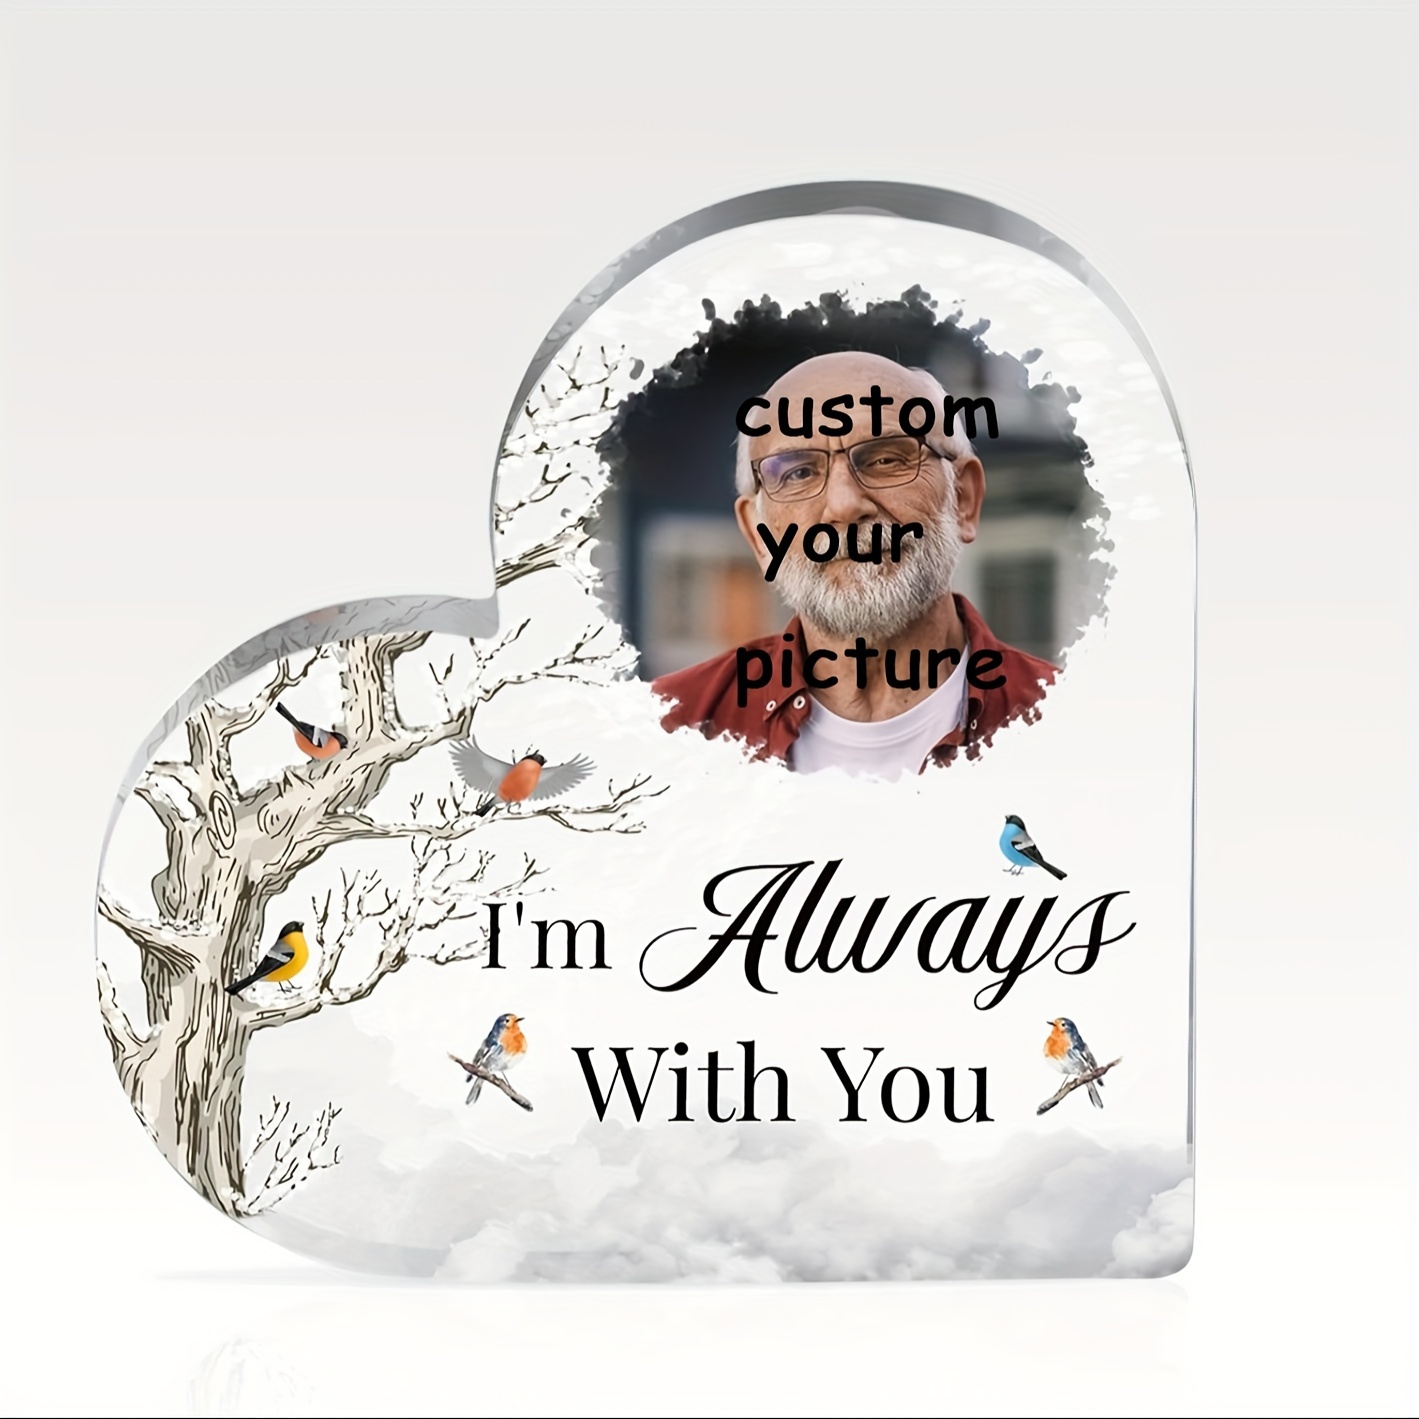 

1pc (customized)personalized Acrylic Photo Plaque Memorial Gift For Family Friends Memorial Picture Acrylic Heart Always With Sympathy Gifts For Loss Of Mom, Dad 3.93inchx3.93inch